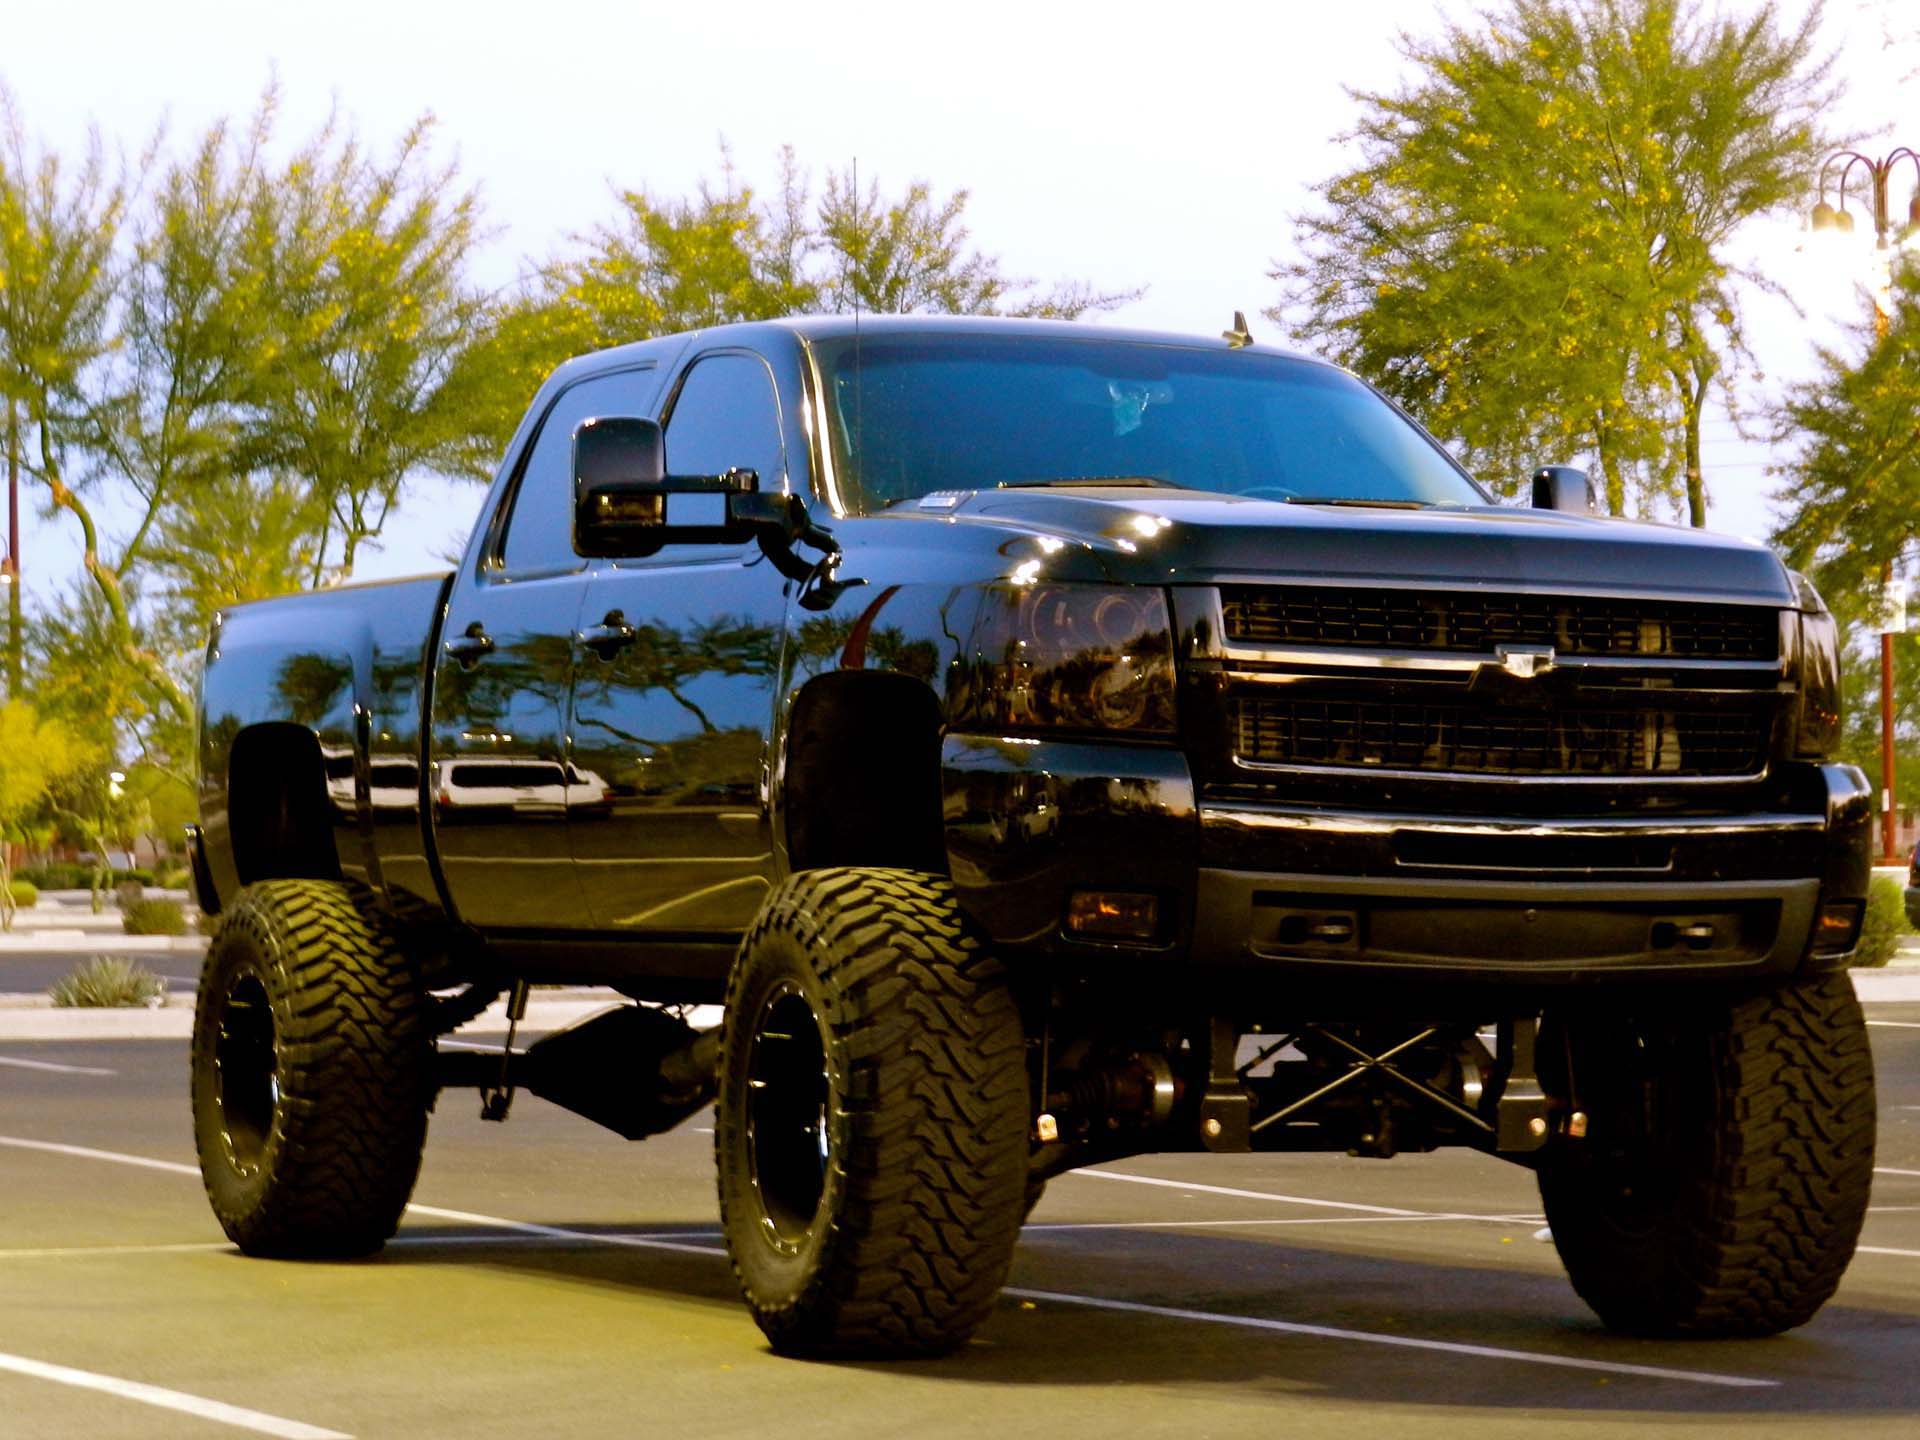 Download Awesome Truck Wallpaper Gallery